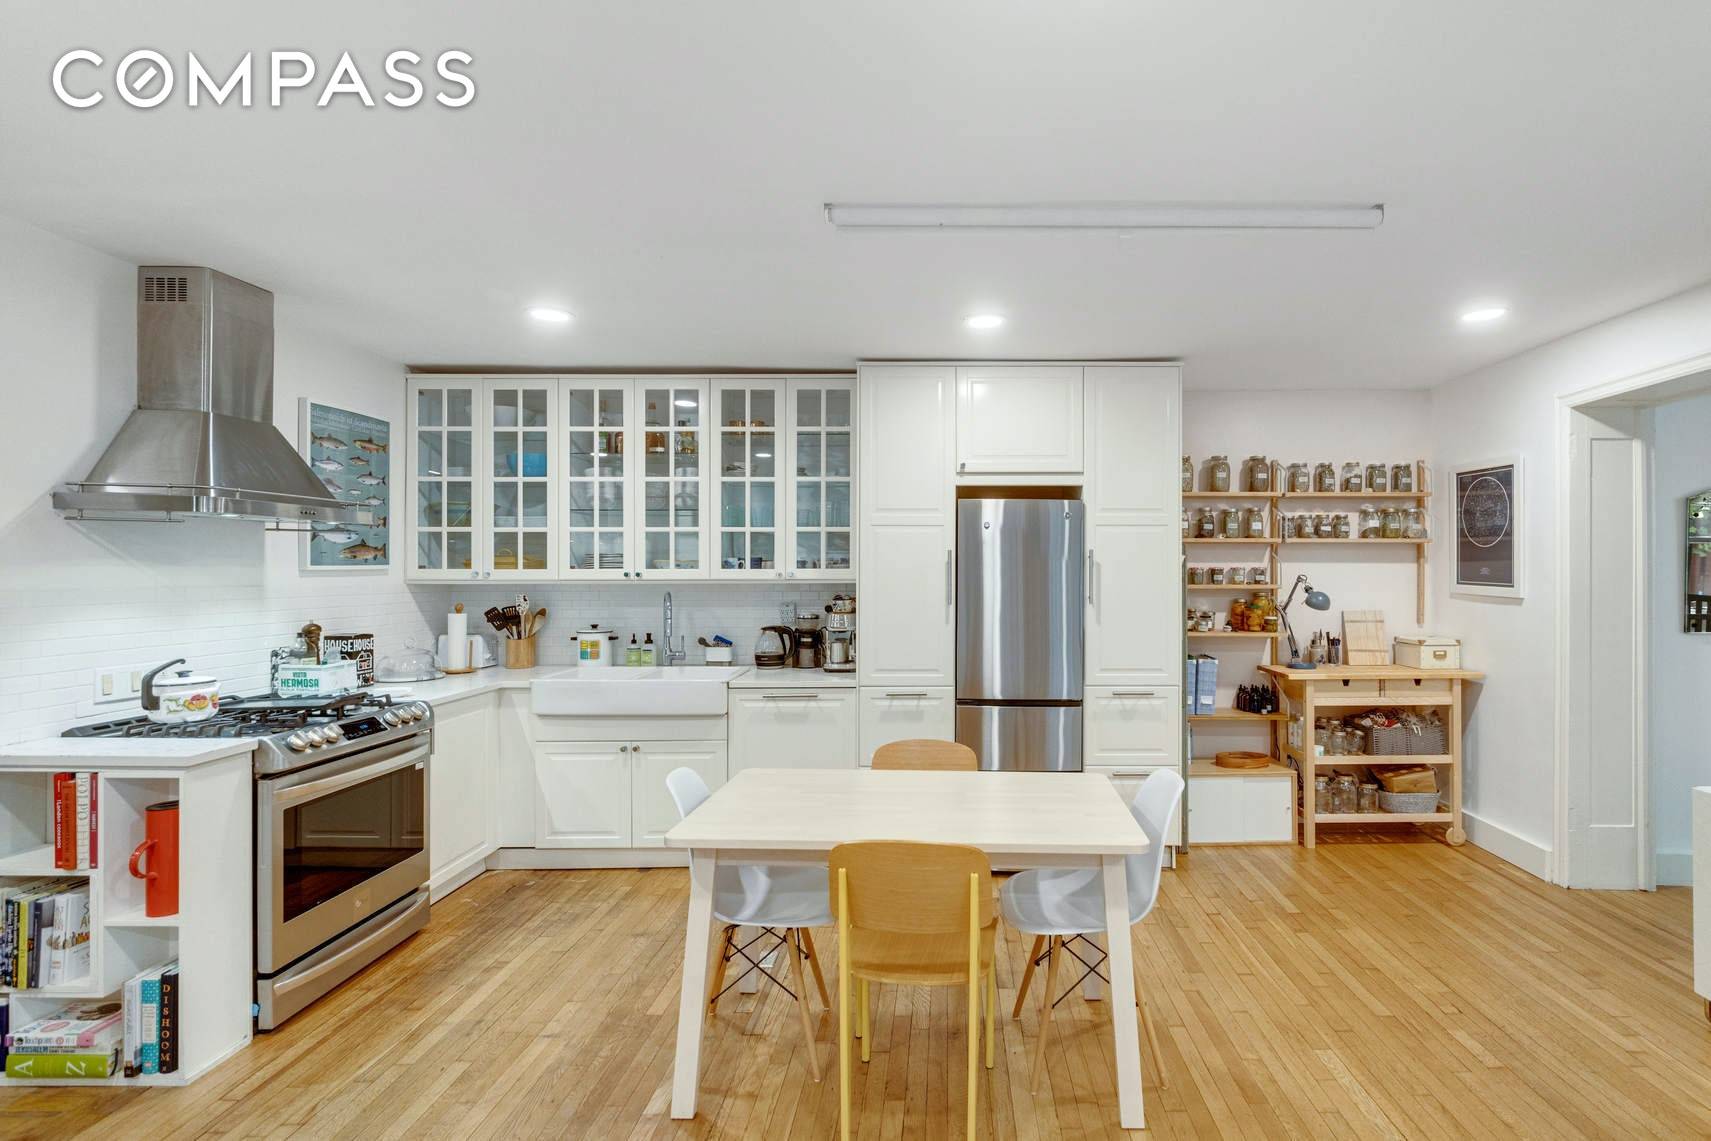 Just listed Spacious 1 bedroom garden apartment located in super prime Park Slope.